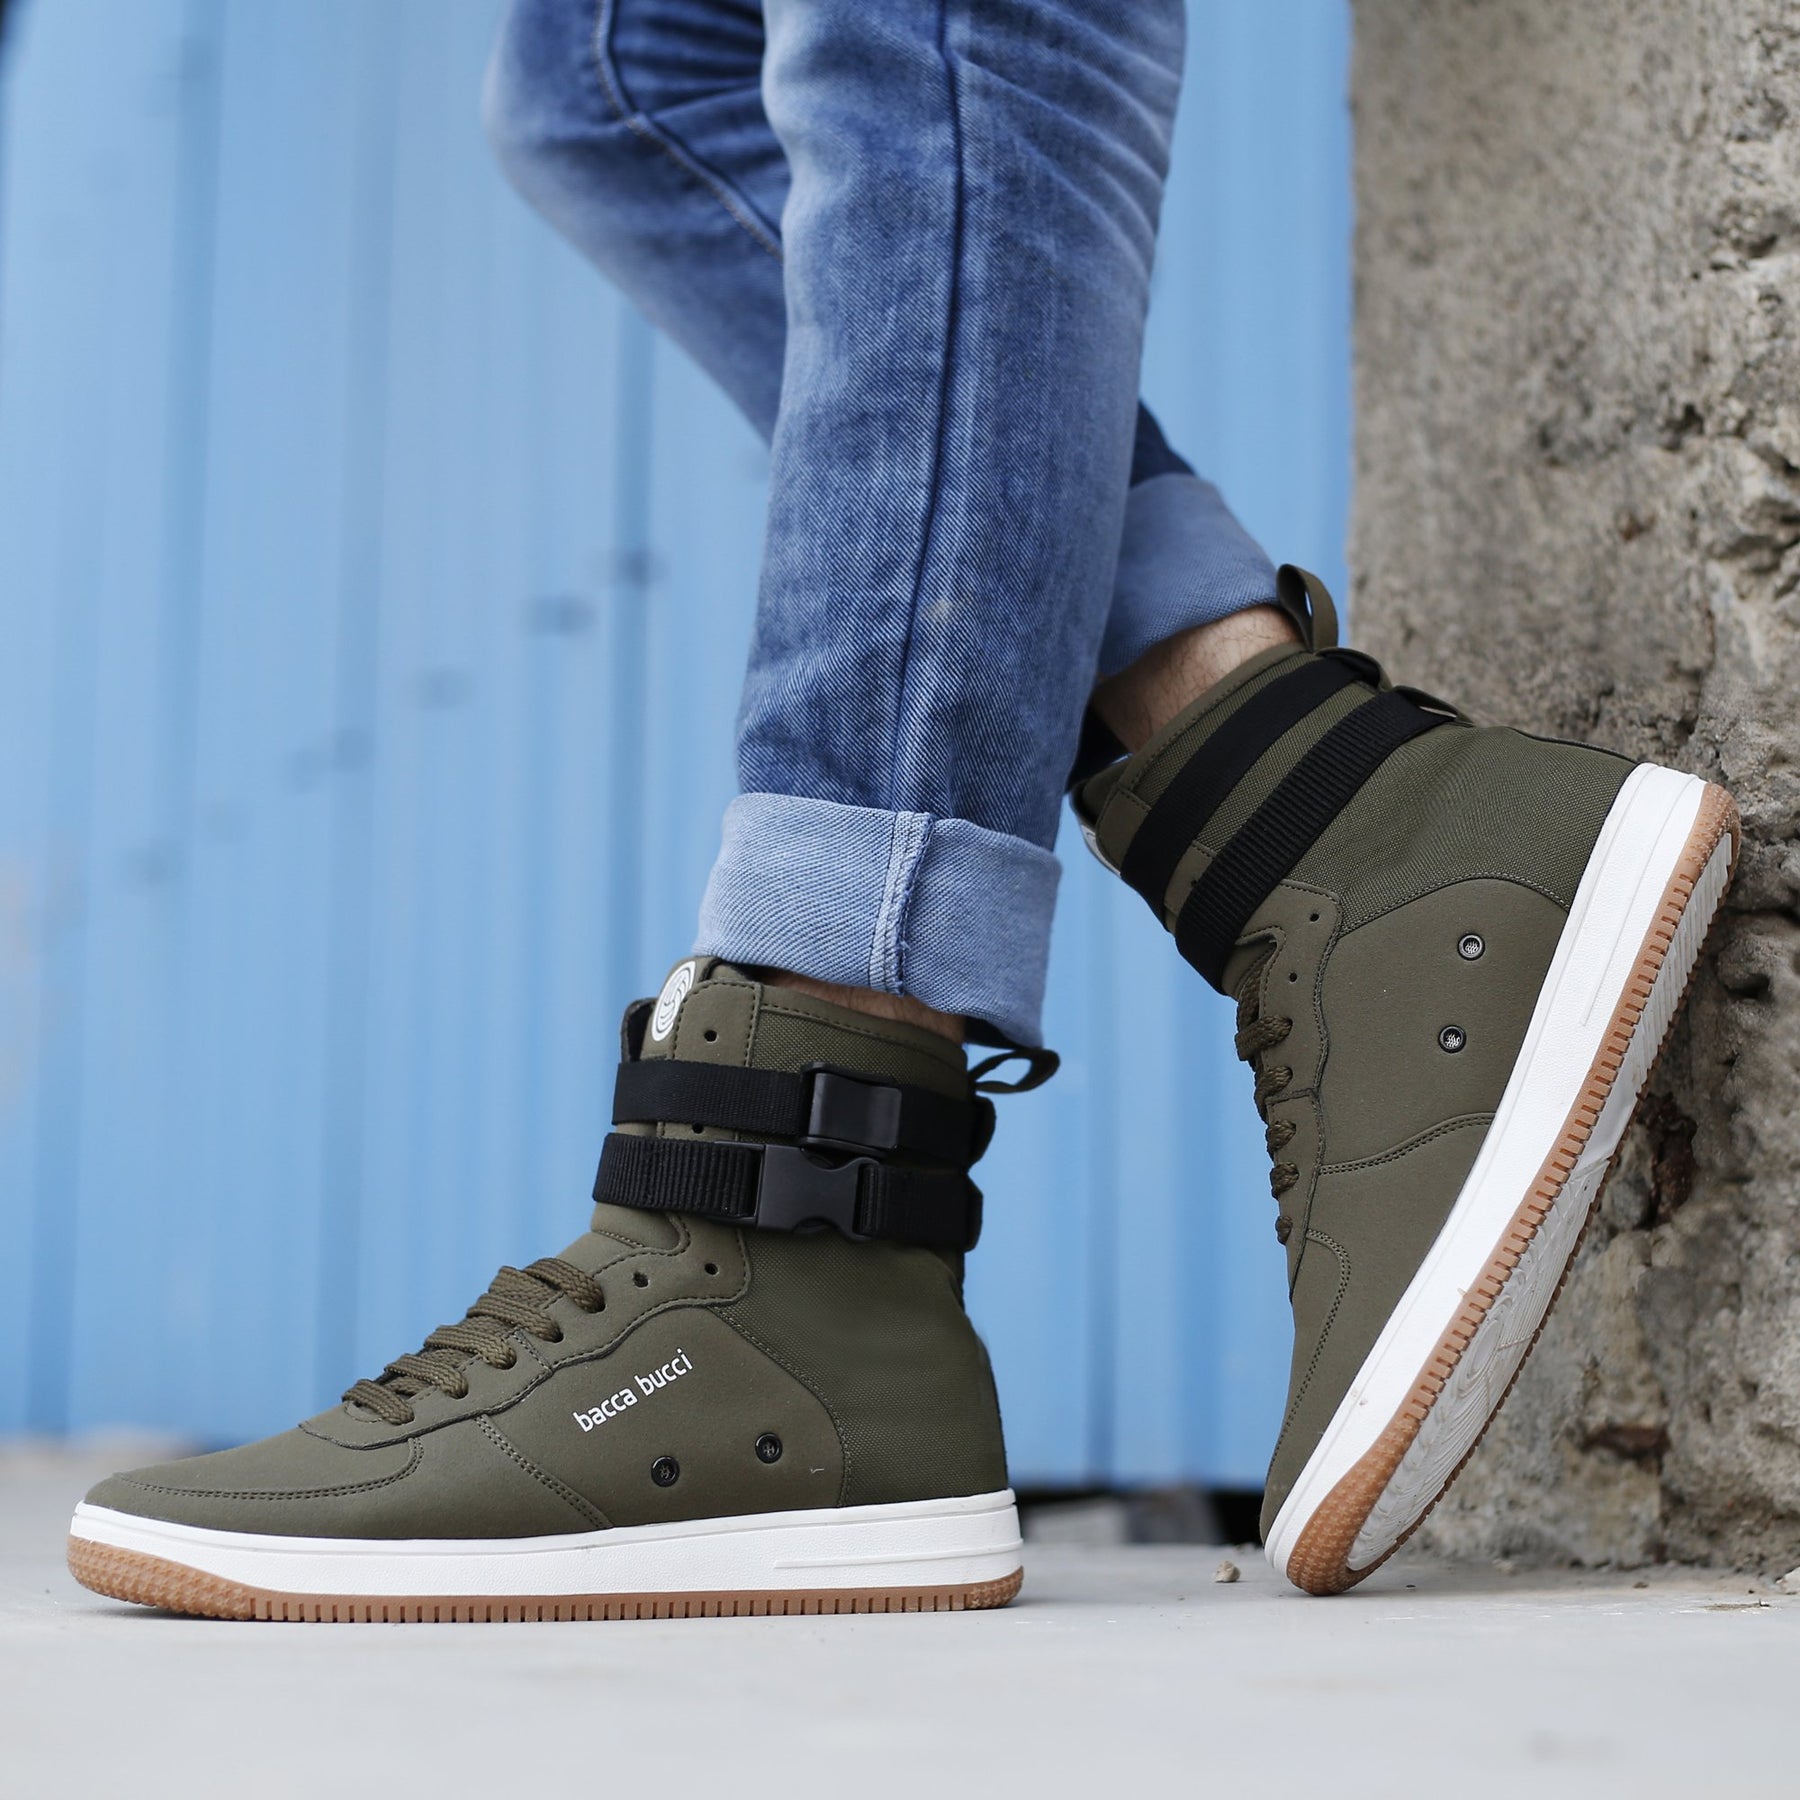 Sneakers For Men's Street Style Fashion Sneakers